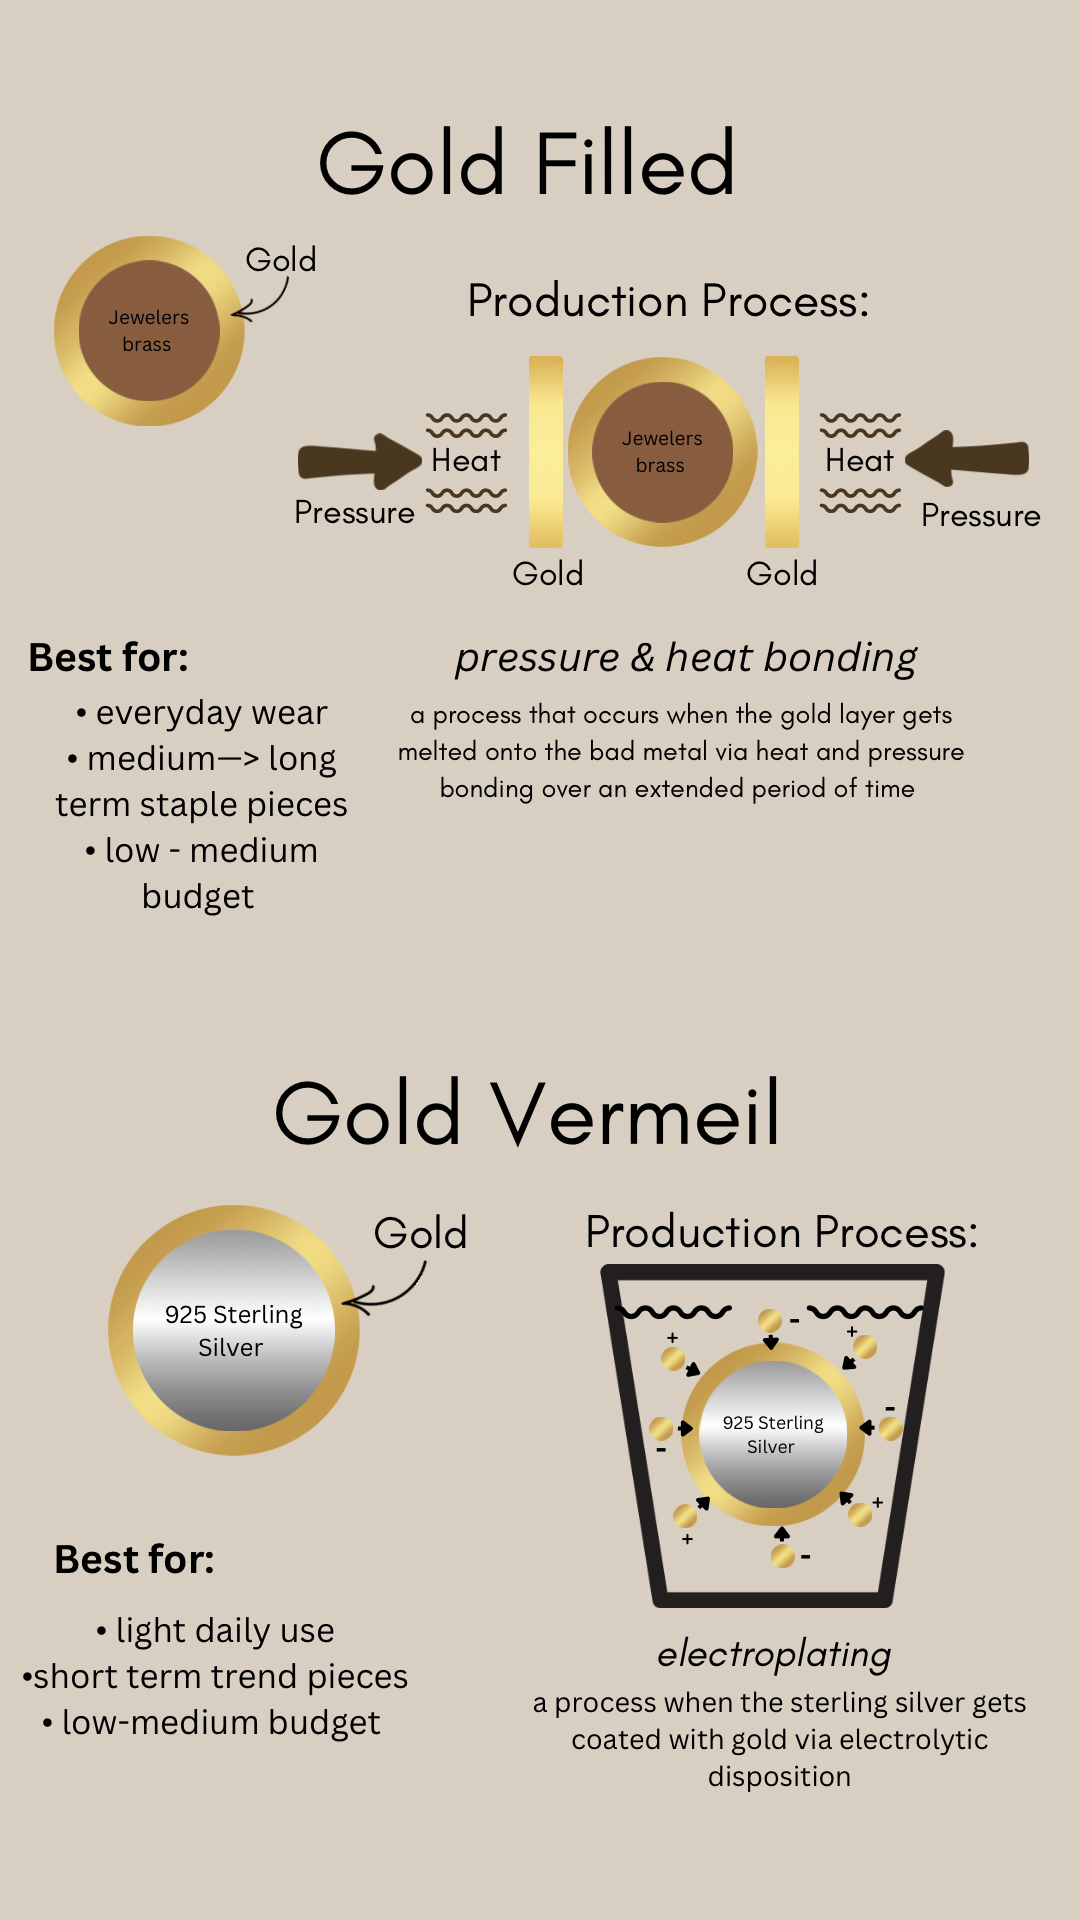 Illustration of gold filled jewelry and gold vermeil jewelry manufacturing processes.